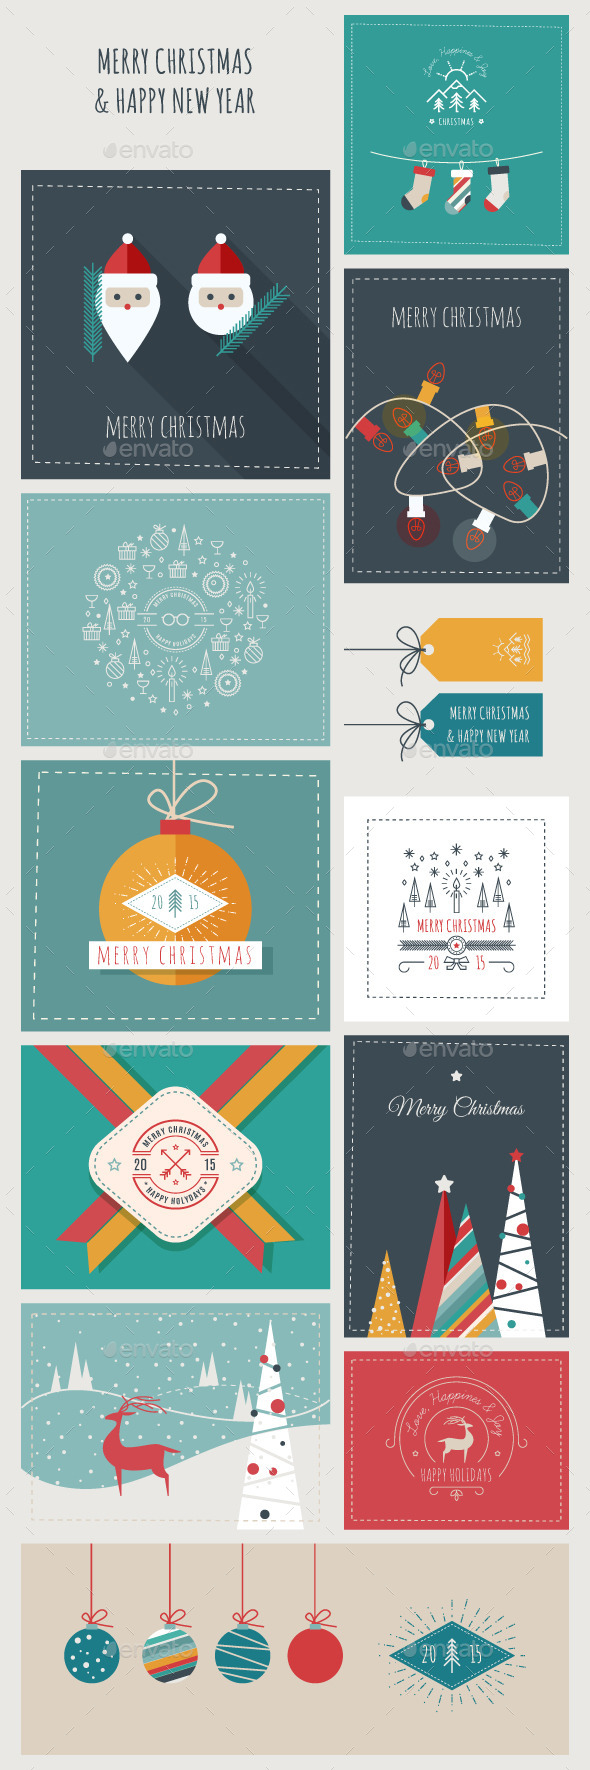 New Year and Christmas Greeting Cards and Banners